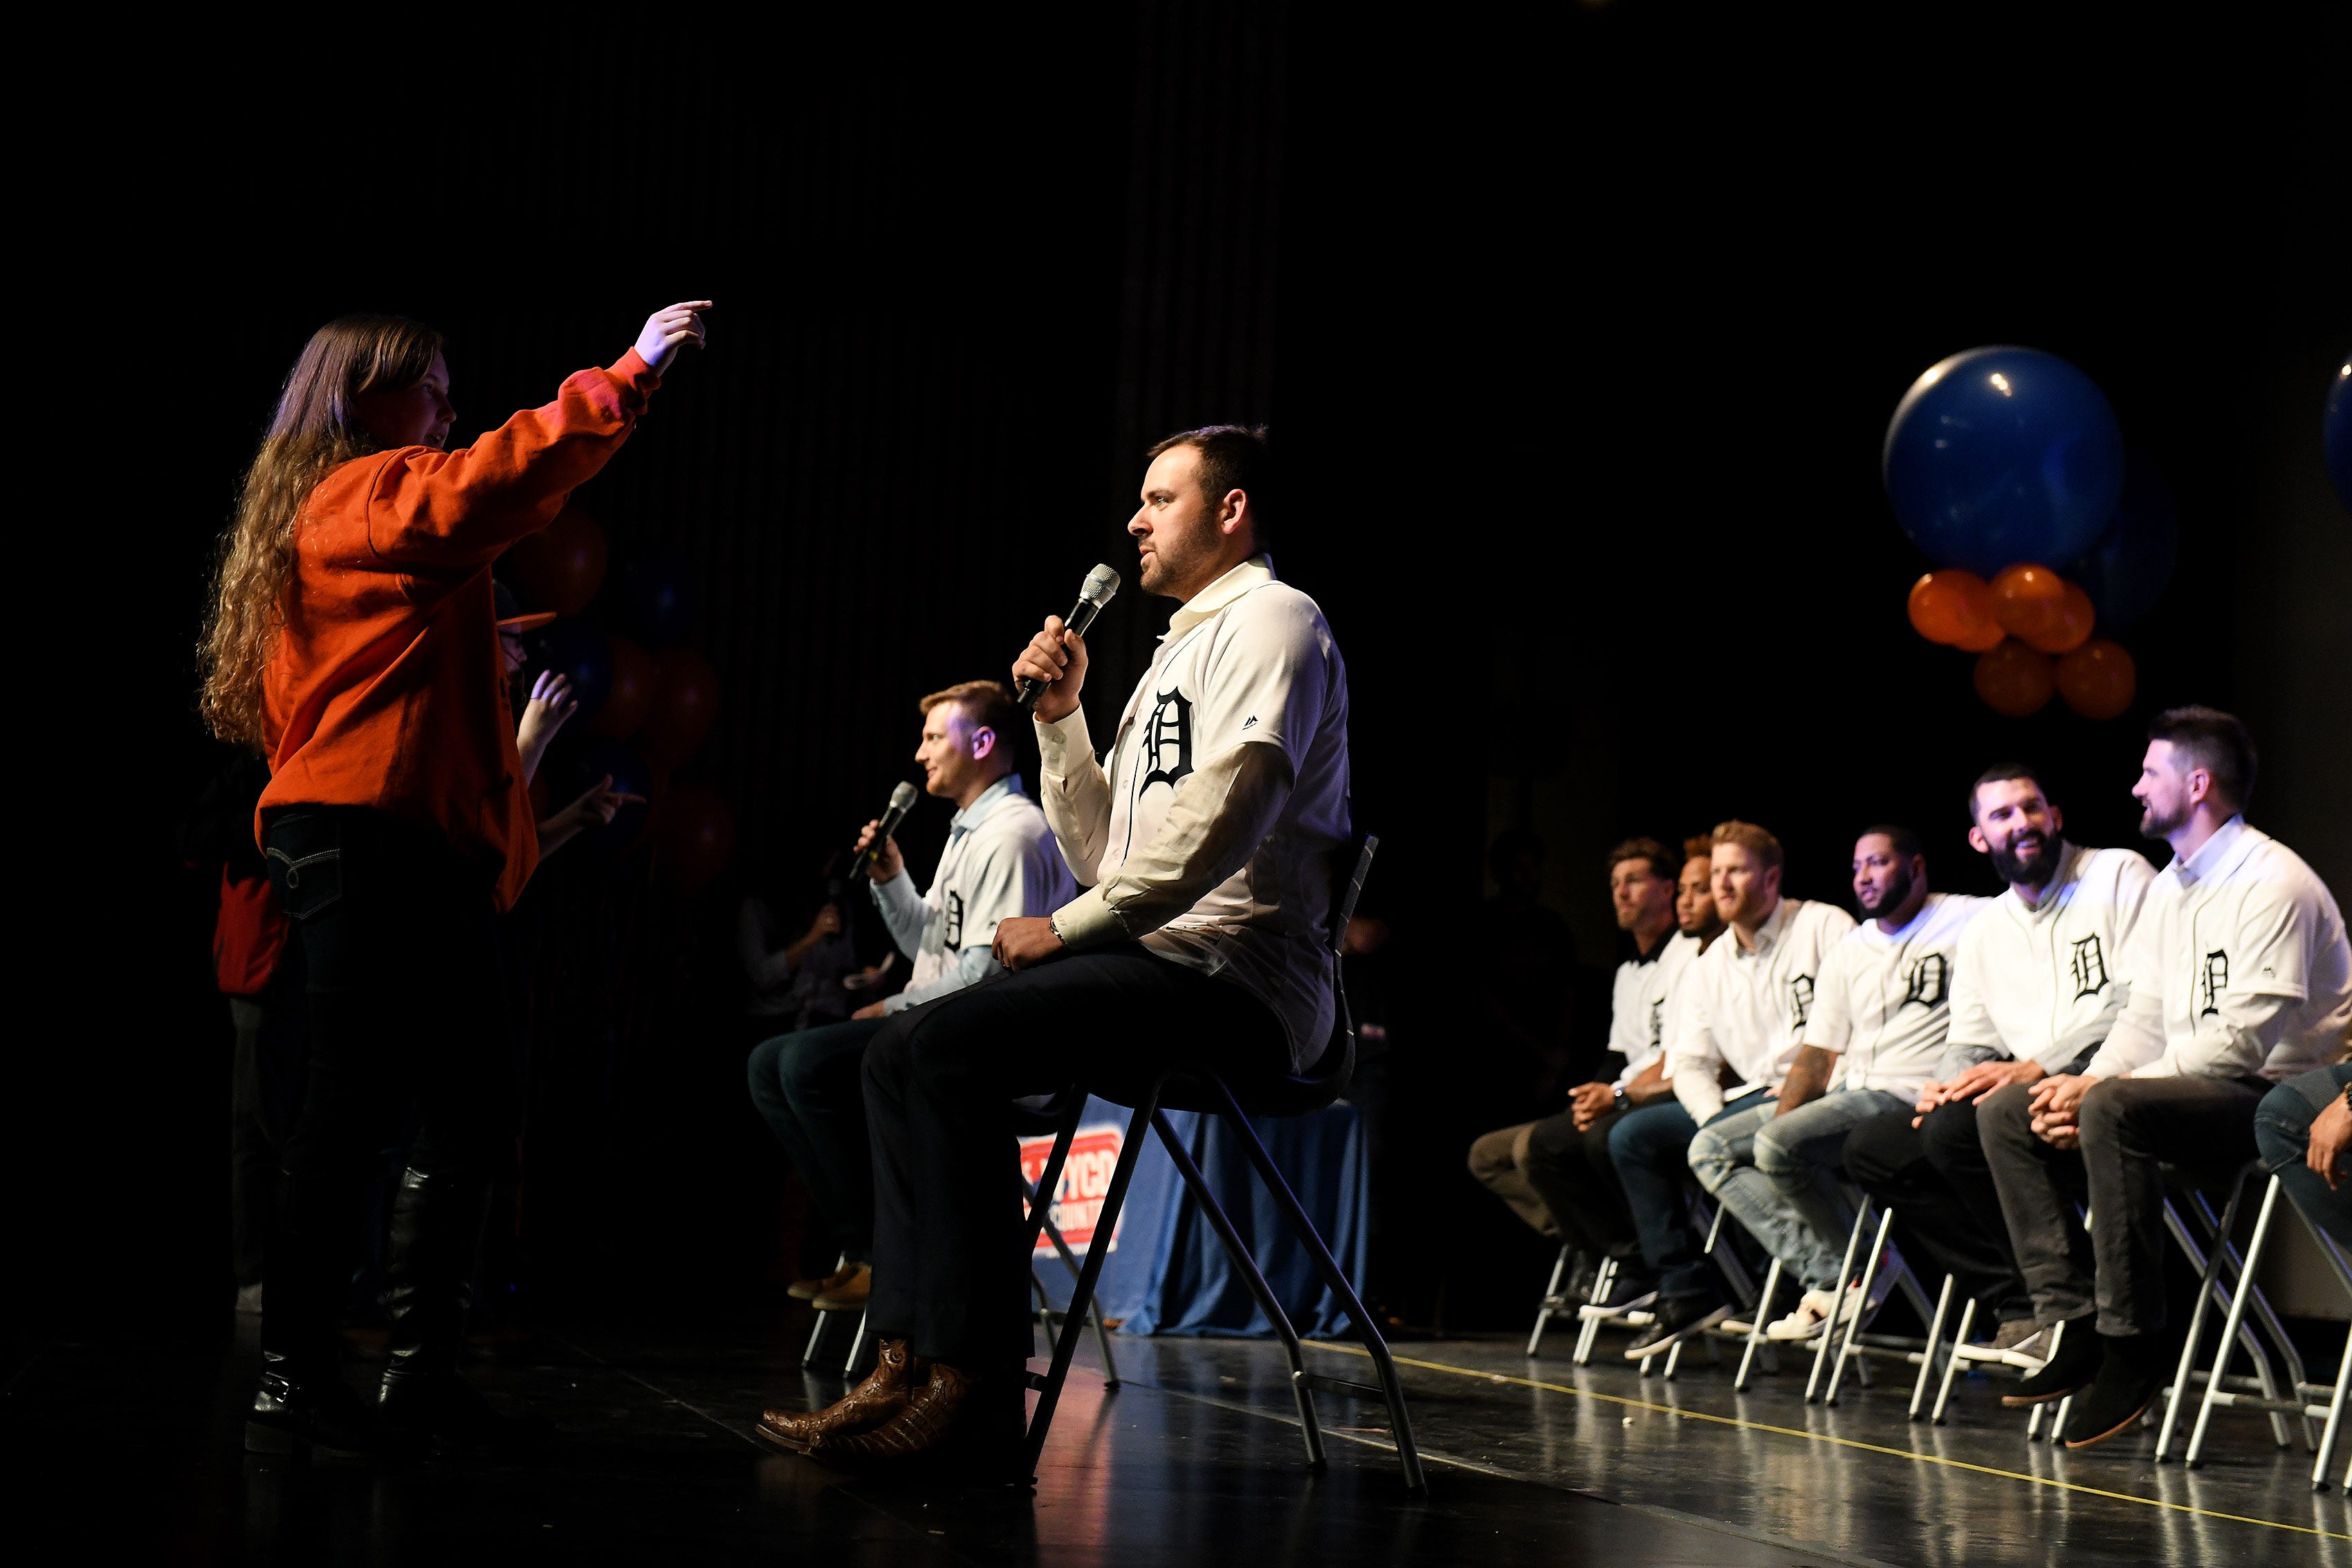 Lorna Davis, 15, of Carelton, left, gives clues to Tigers pitcher Michael Fulmer while they play a charades type game at a kids rally at Novi High School.